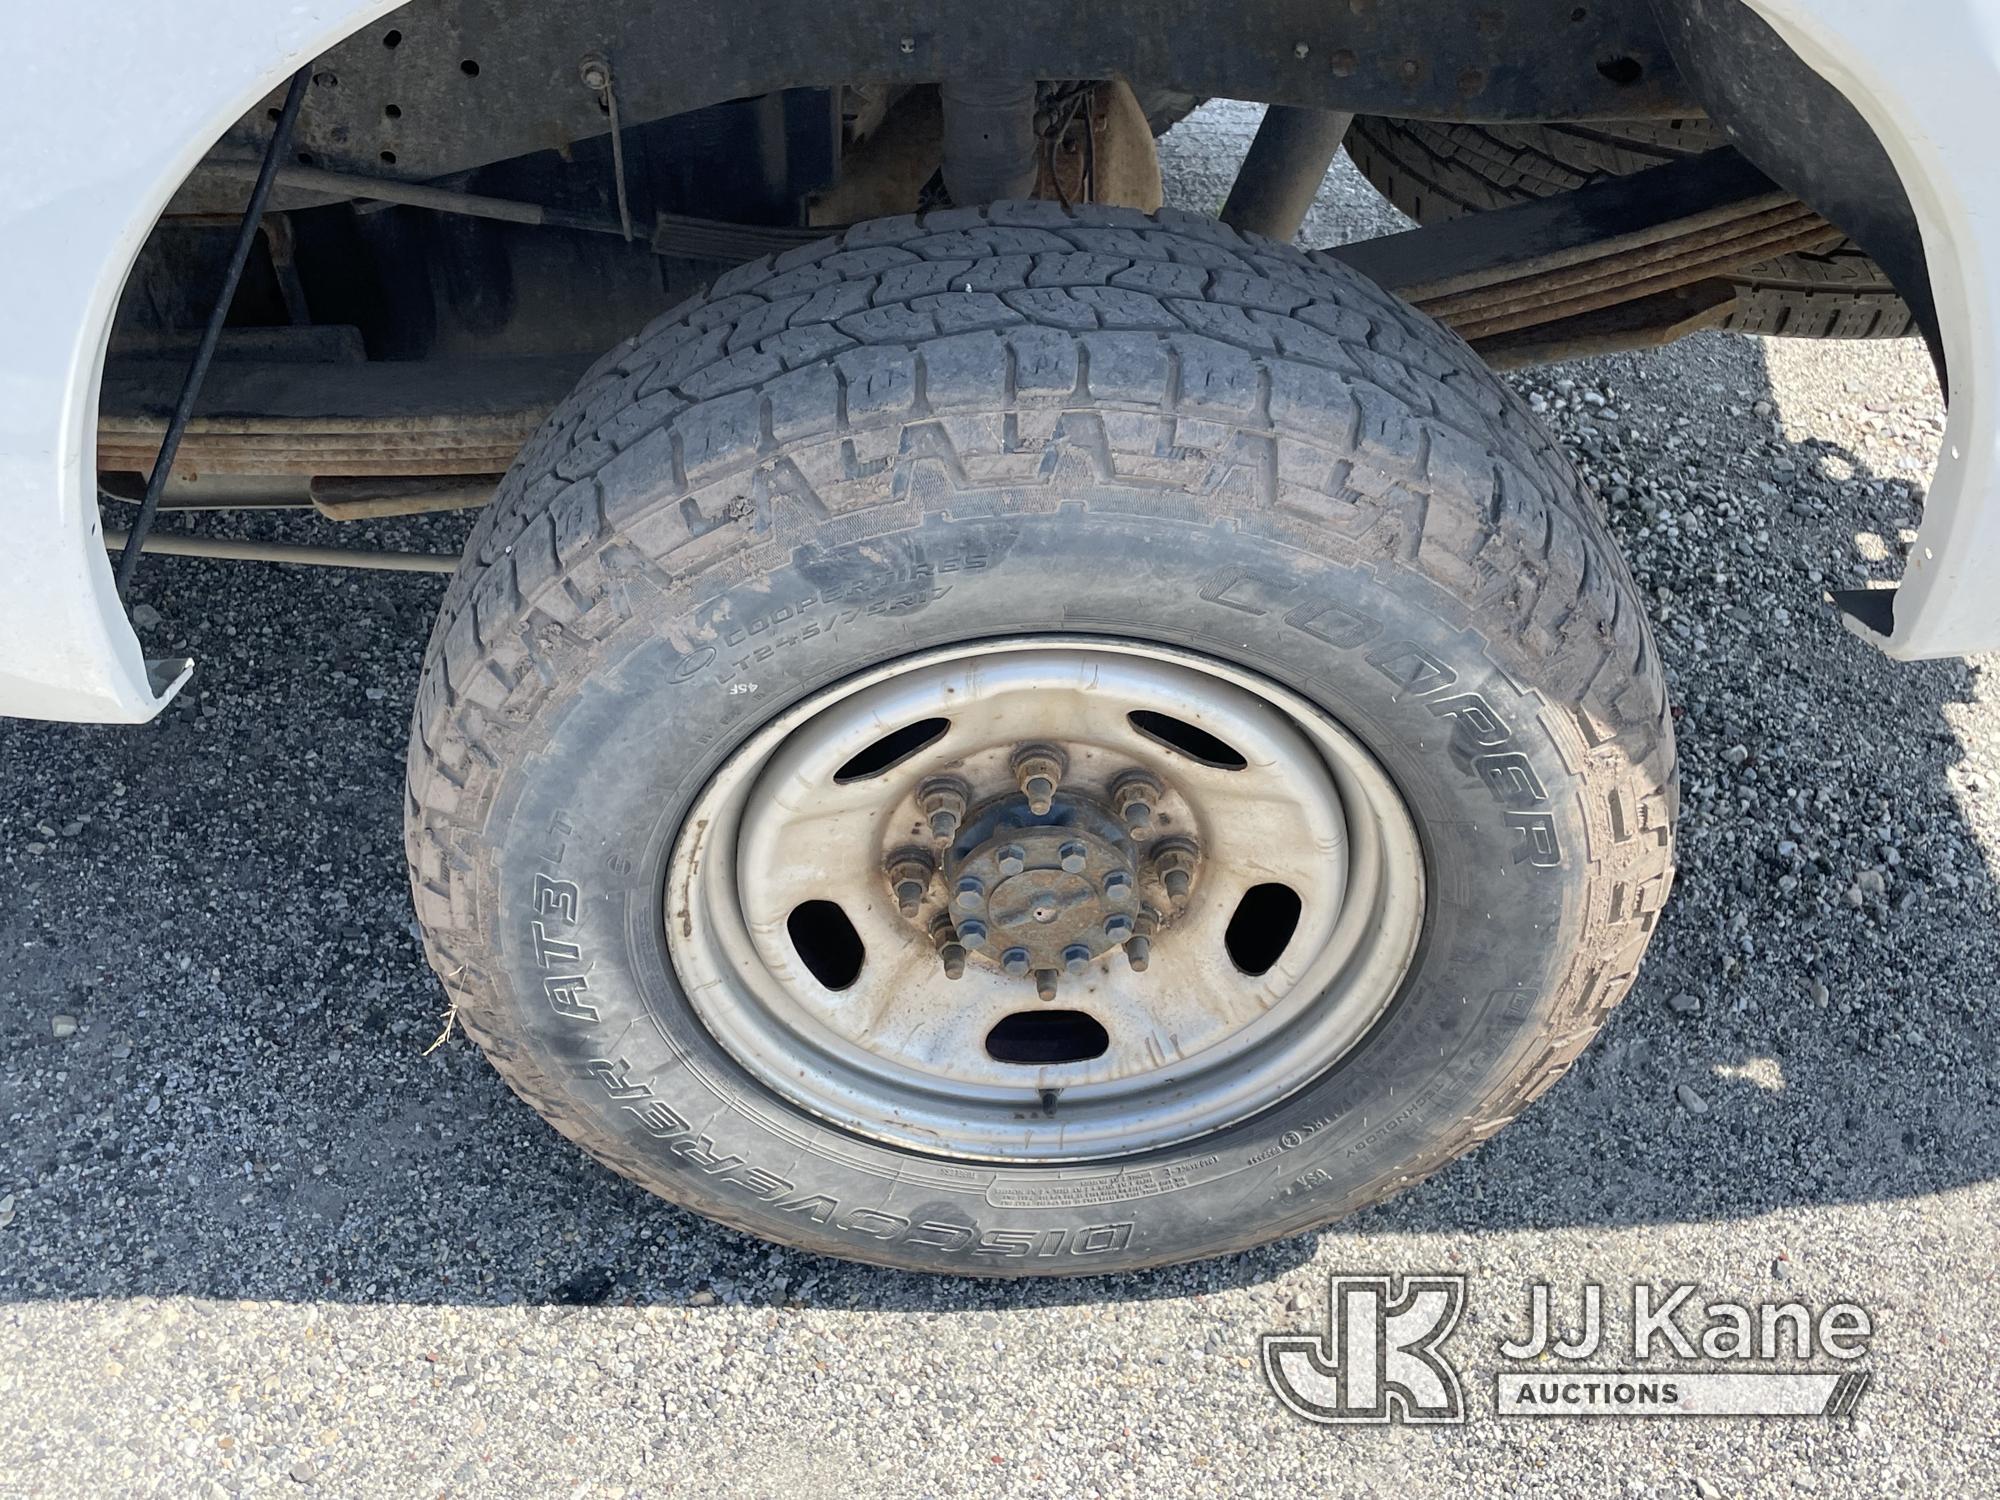 (Plymouth Meeting, PA) 2014 Ford F250 4x4 Crew-Cab Pickup Truck Runs & Moves, Body & Rust Damage, Fr